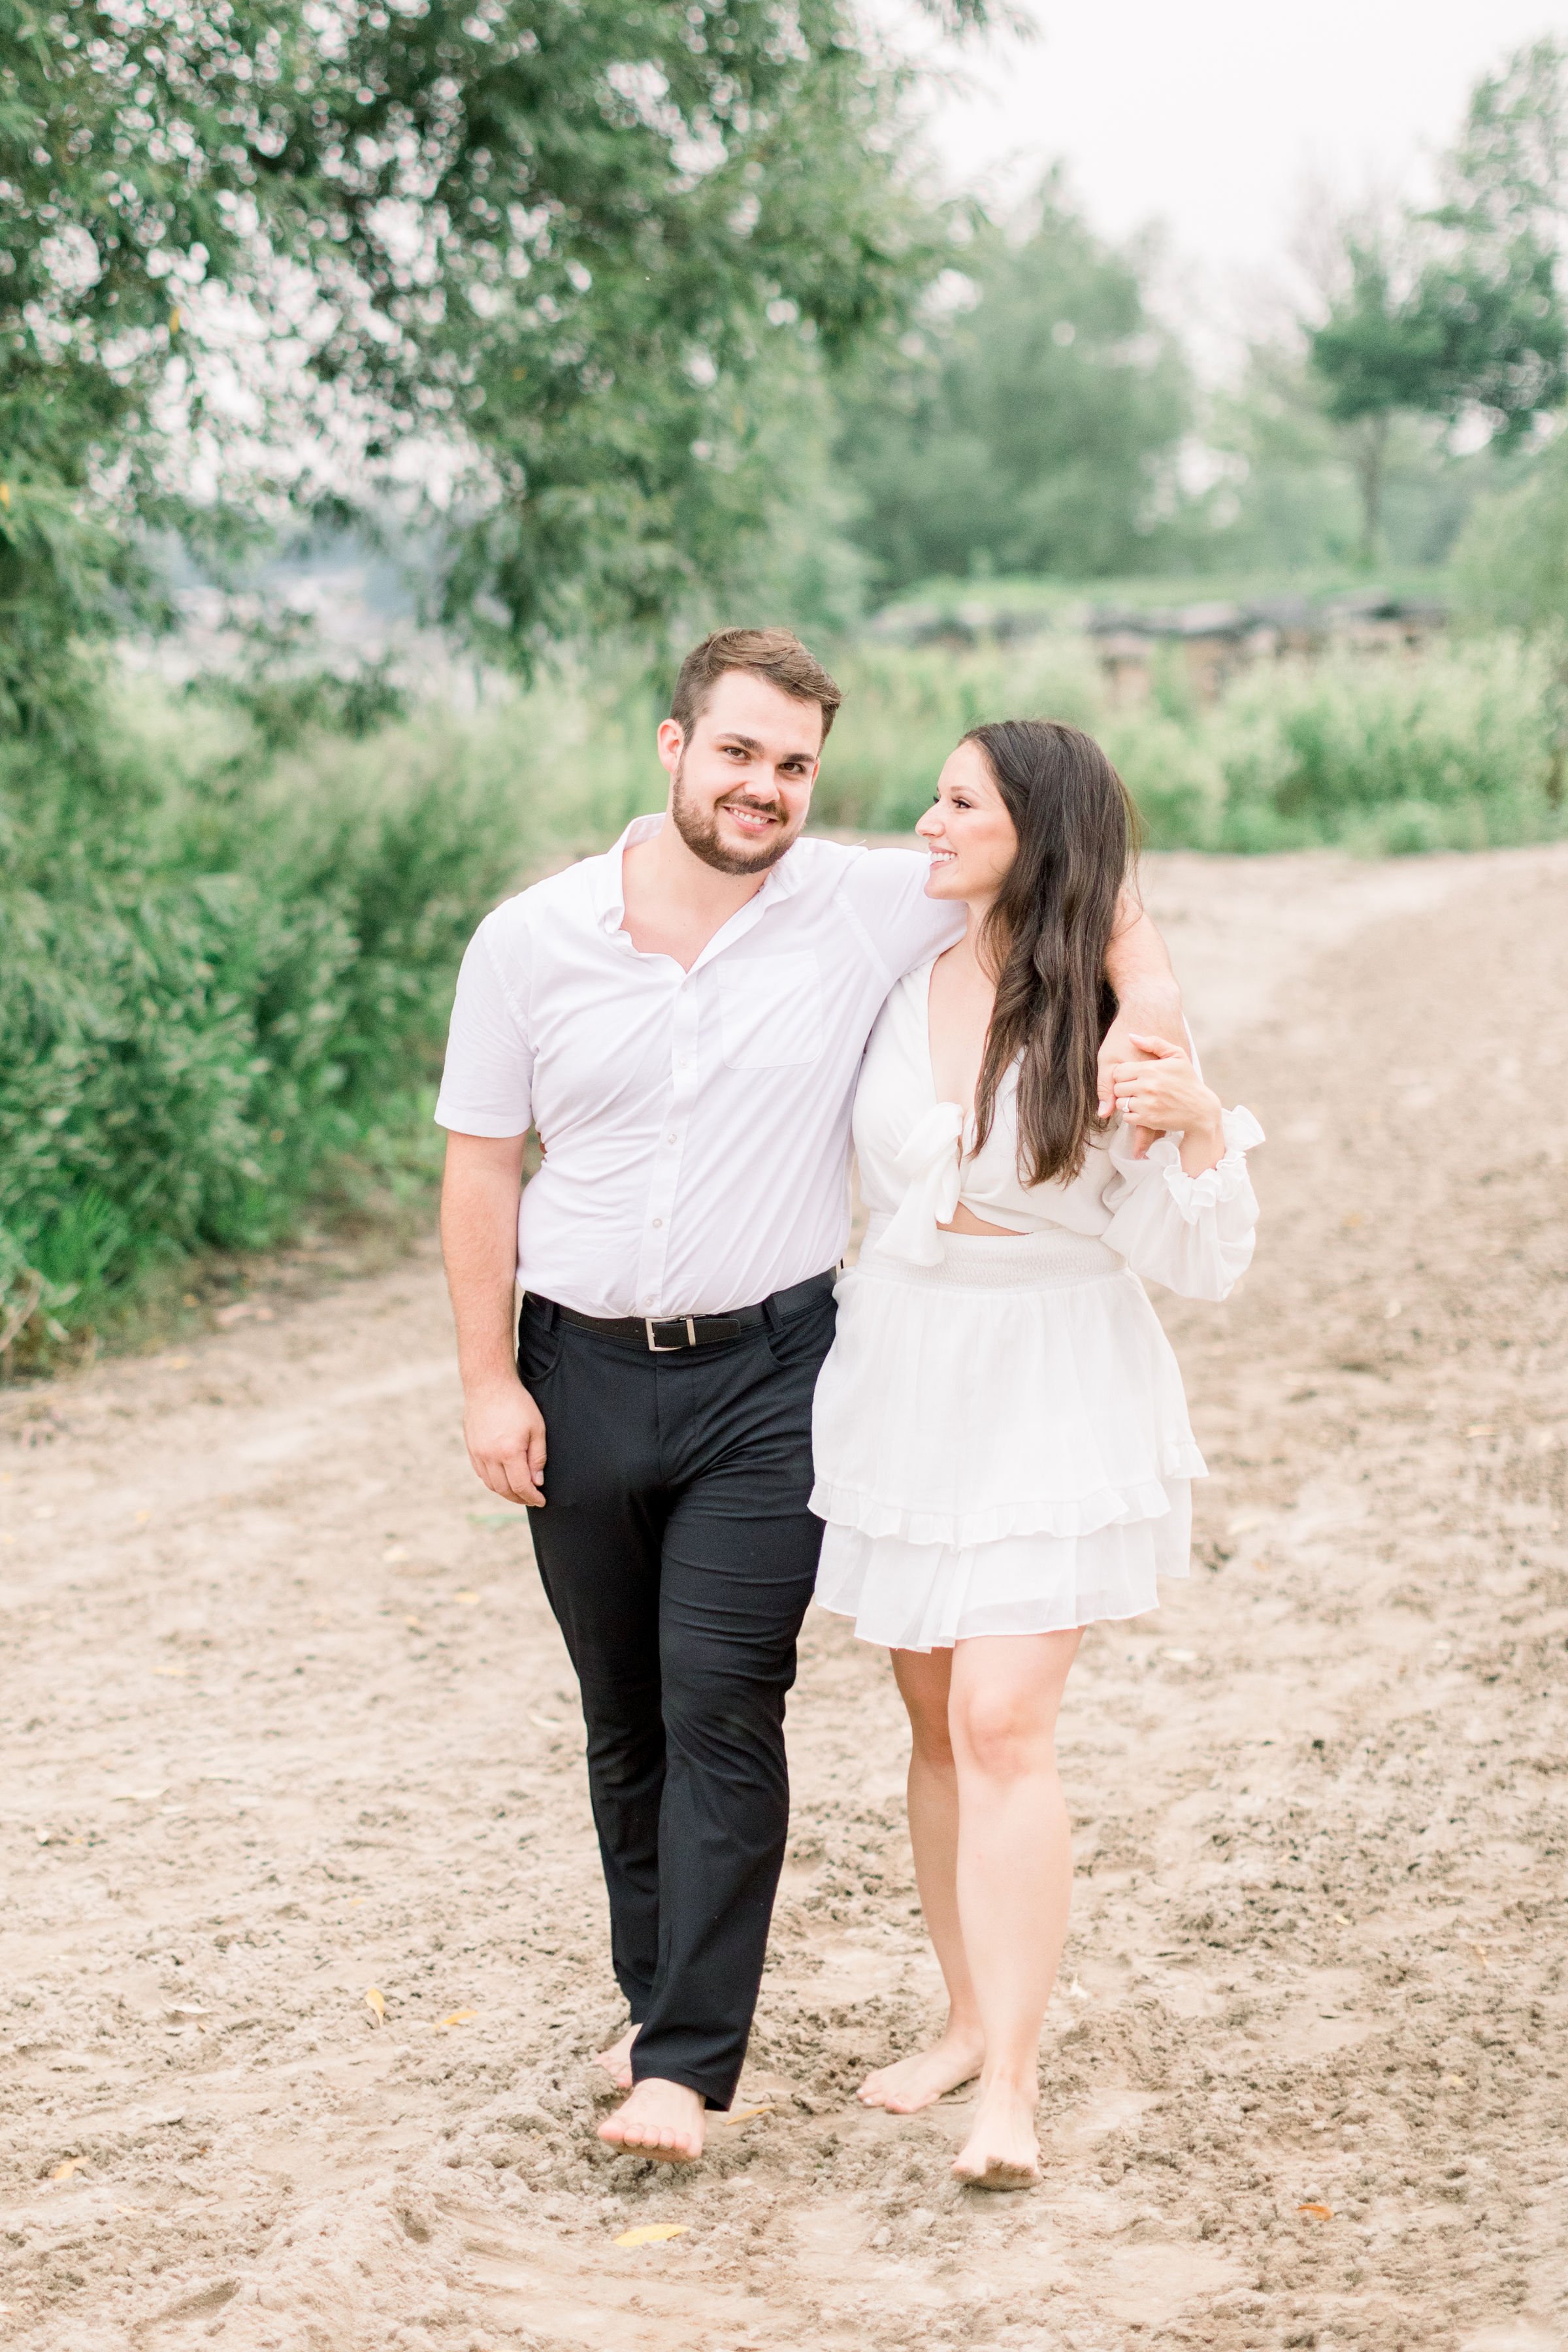  Wearing white an engaged couple enjoys each other's company in Kingston park by Chelsea Mason Photography. white outfits #Kingstonengagement #GrassCreekParkPortraits #Ontarioengagementphotographers #Chelseamasonphotography #Chelseamasonengagements 